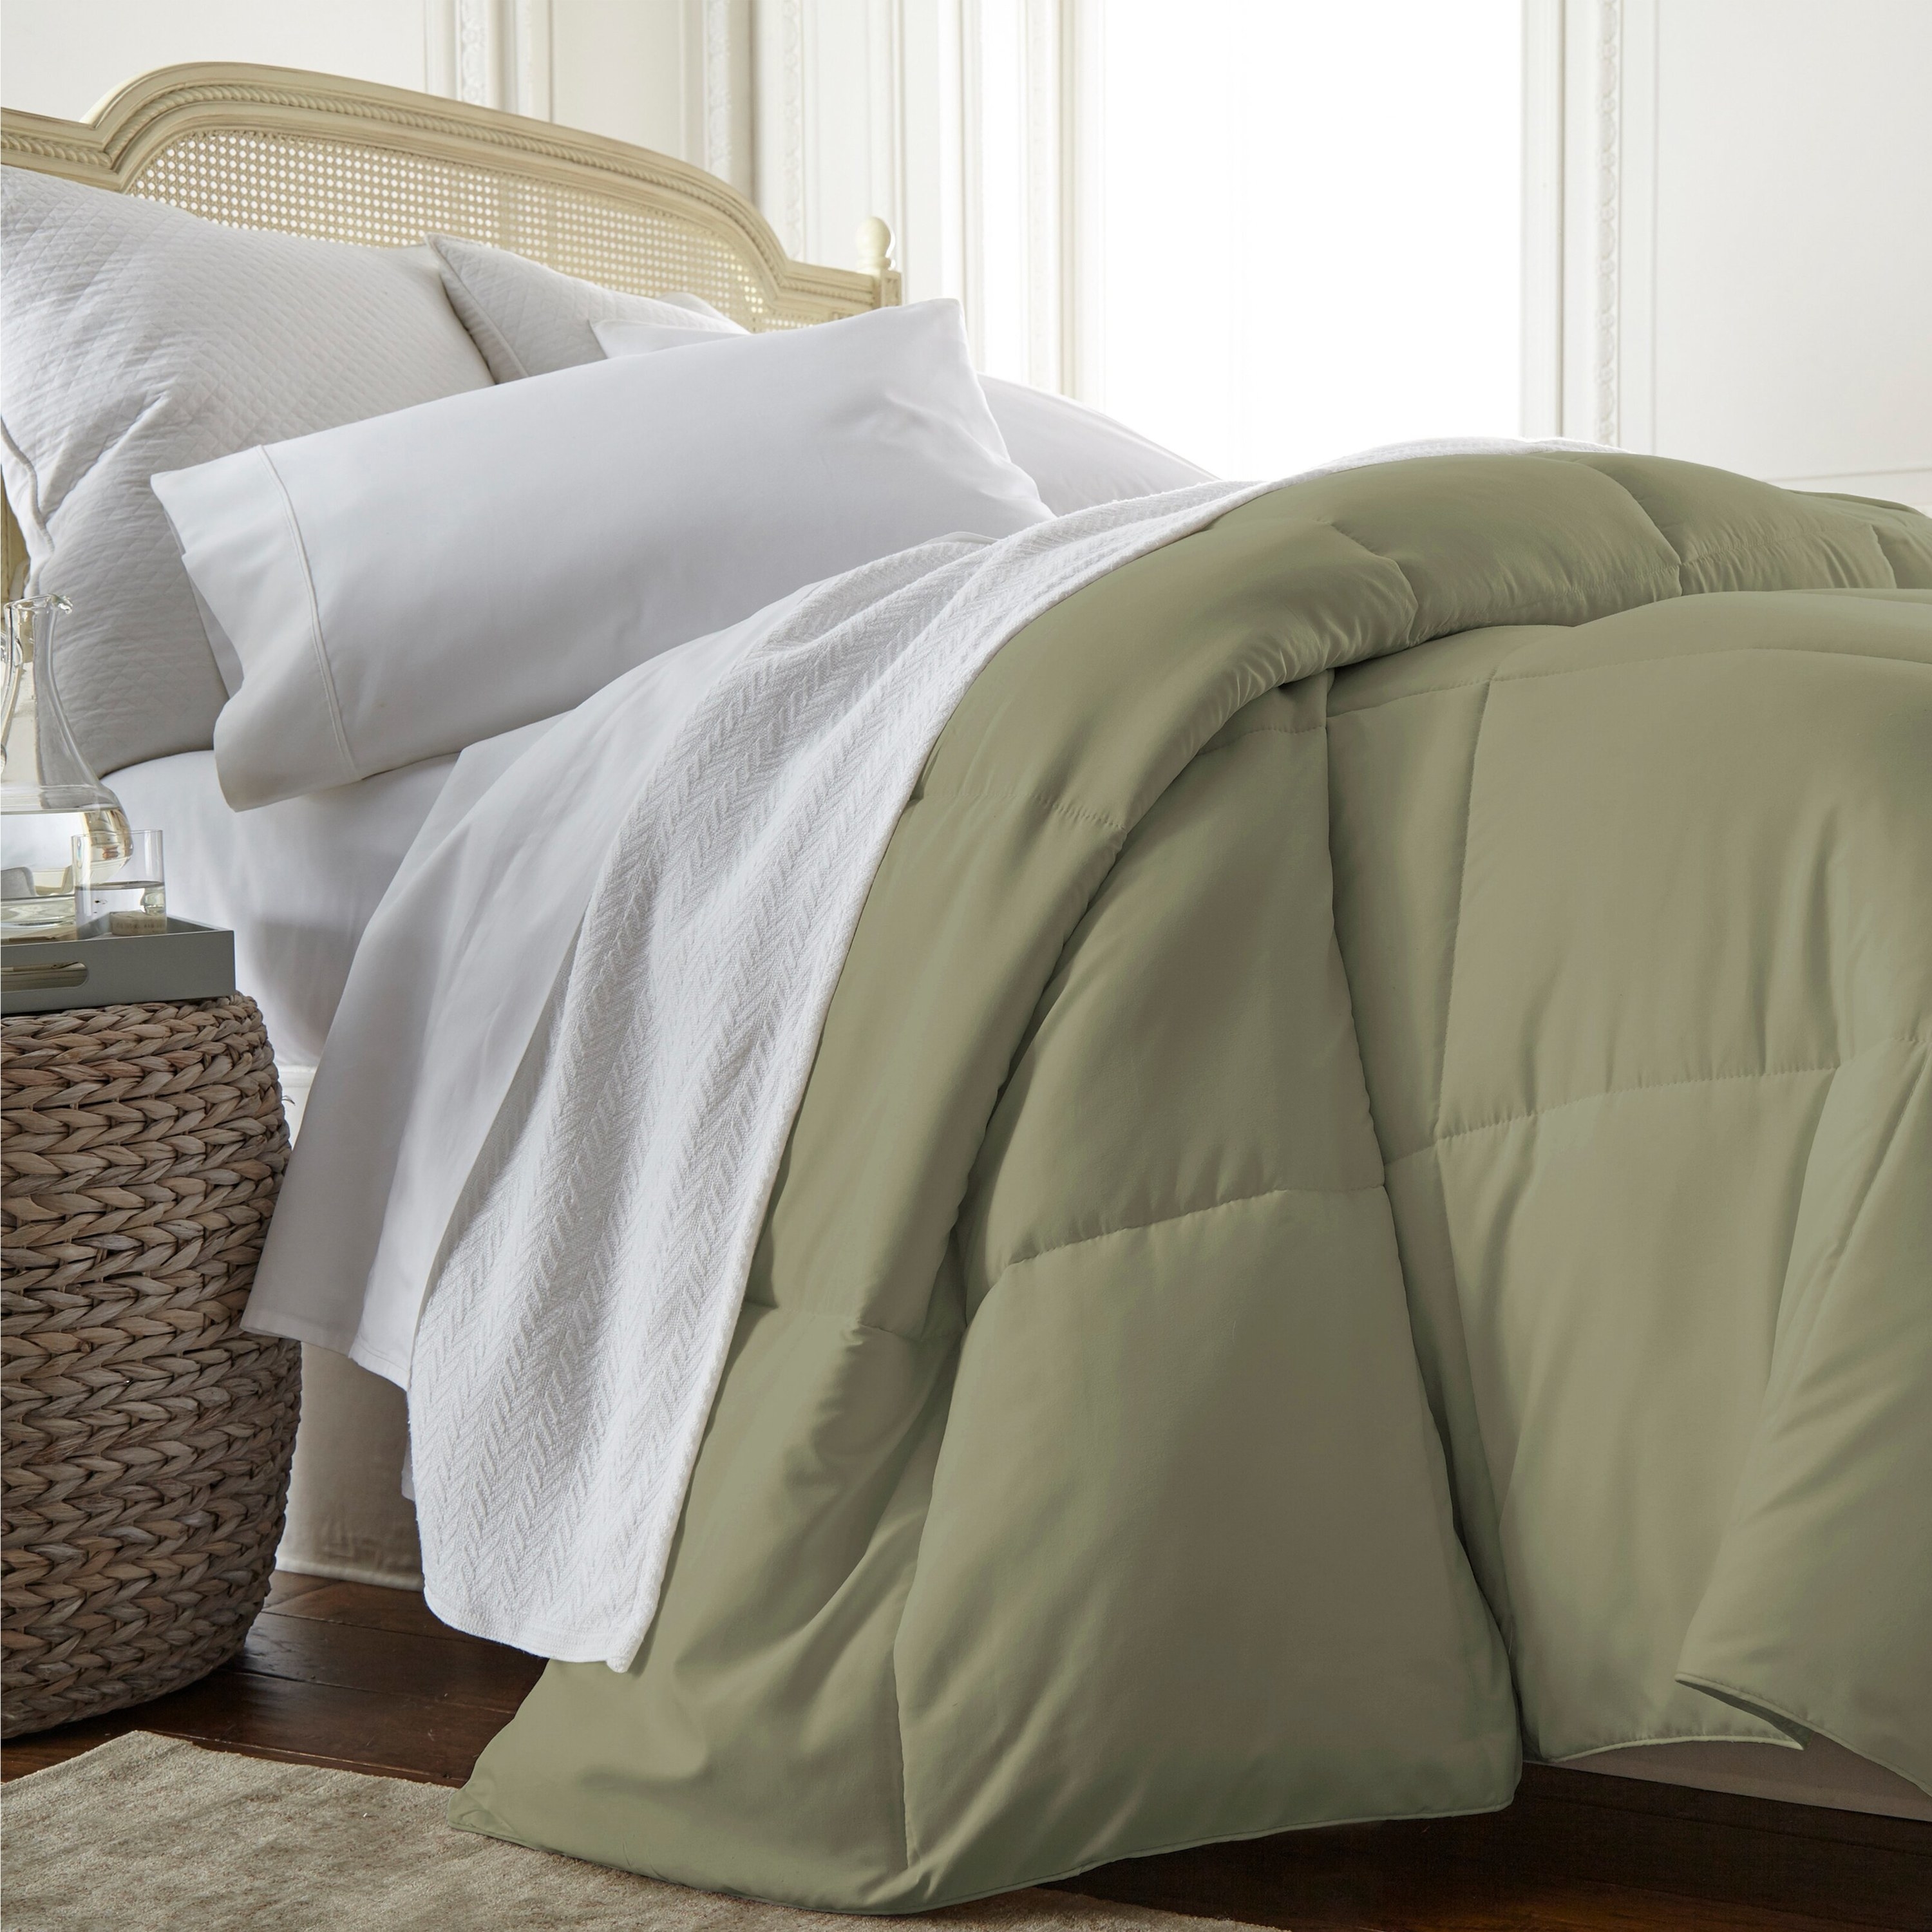 A green microfiber down comforter draped over a bed